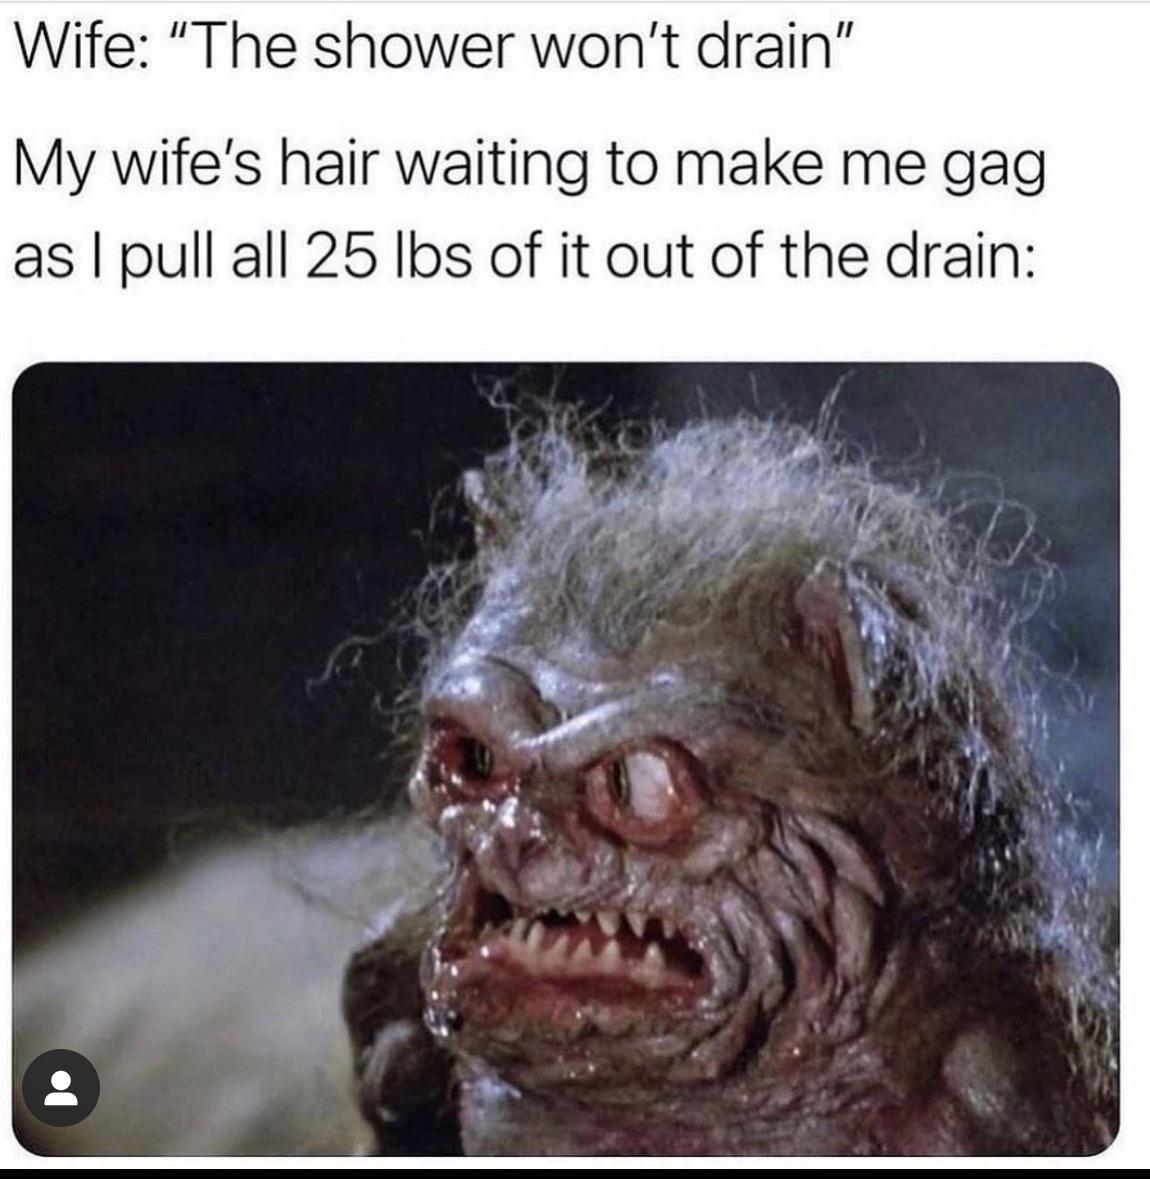 funniest memes - wife hair drain meme - Wife "The shower won't drain" My wife's hair waiting to make me gag as I pull all 25 lbs of it out of the drain